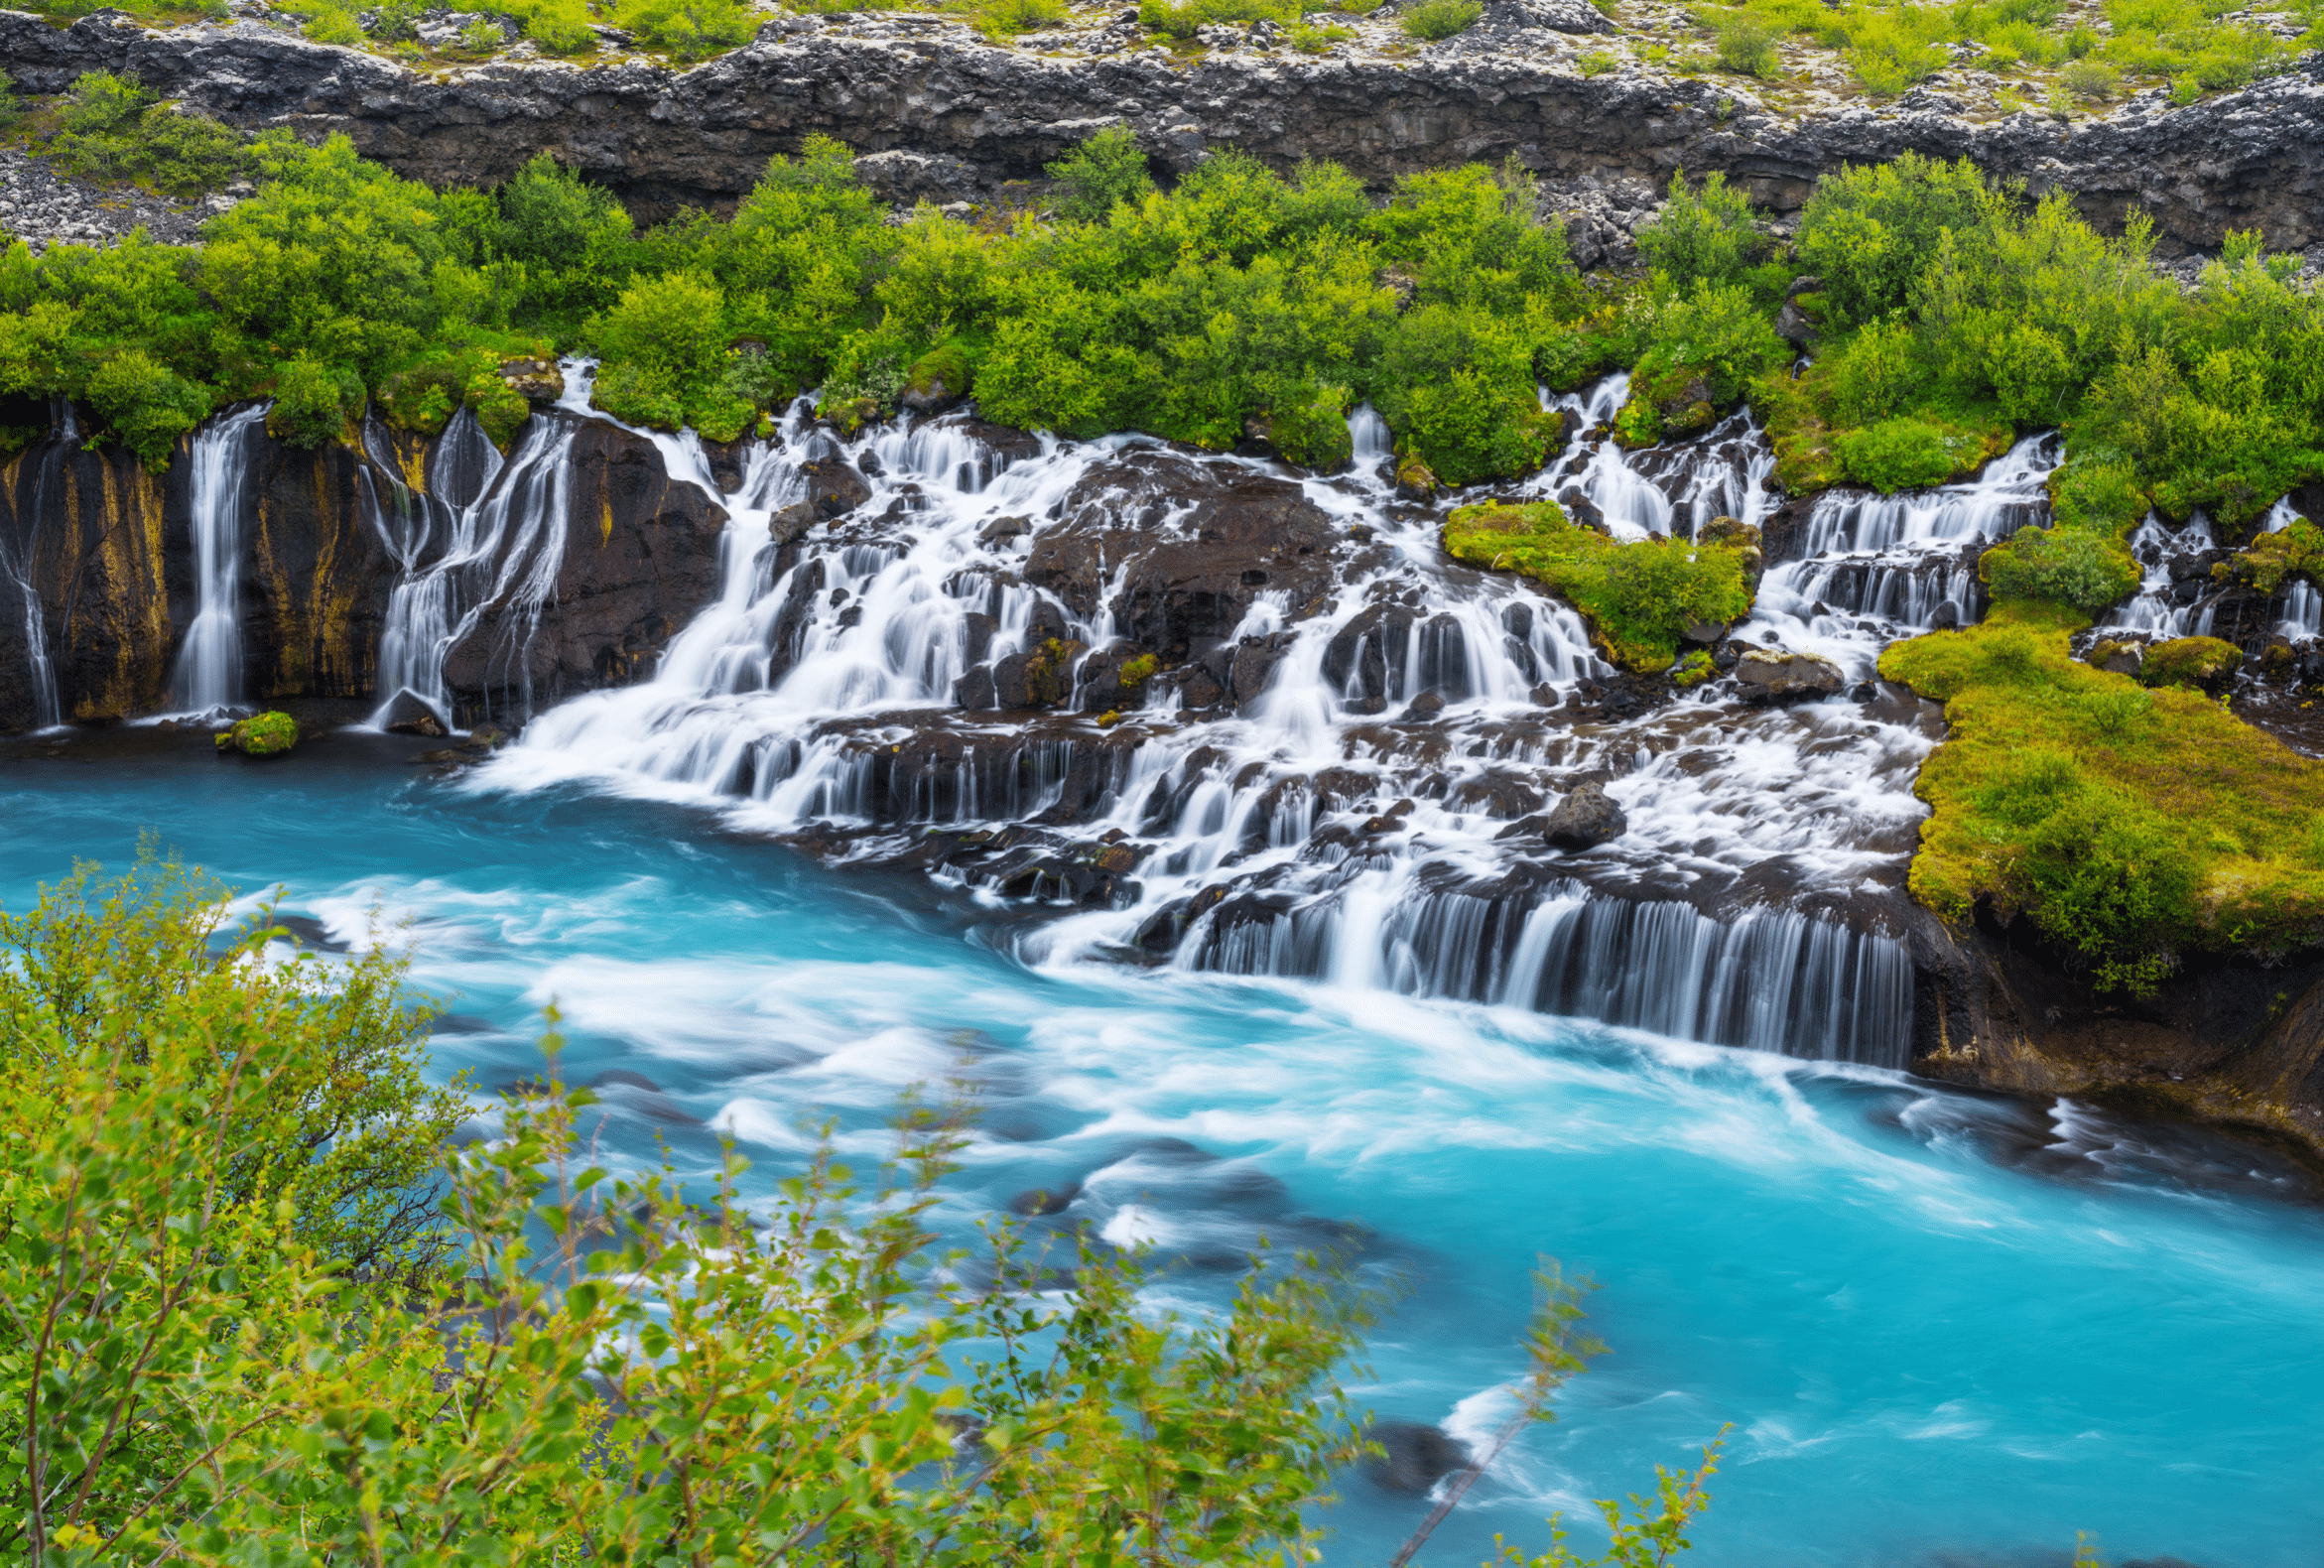 Water flowing down a lava field into a river at Hraunfossar waterfalls in West-Iceland, surrounded by greenery.